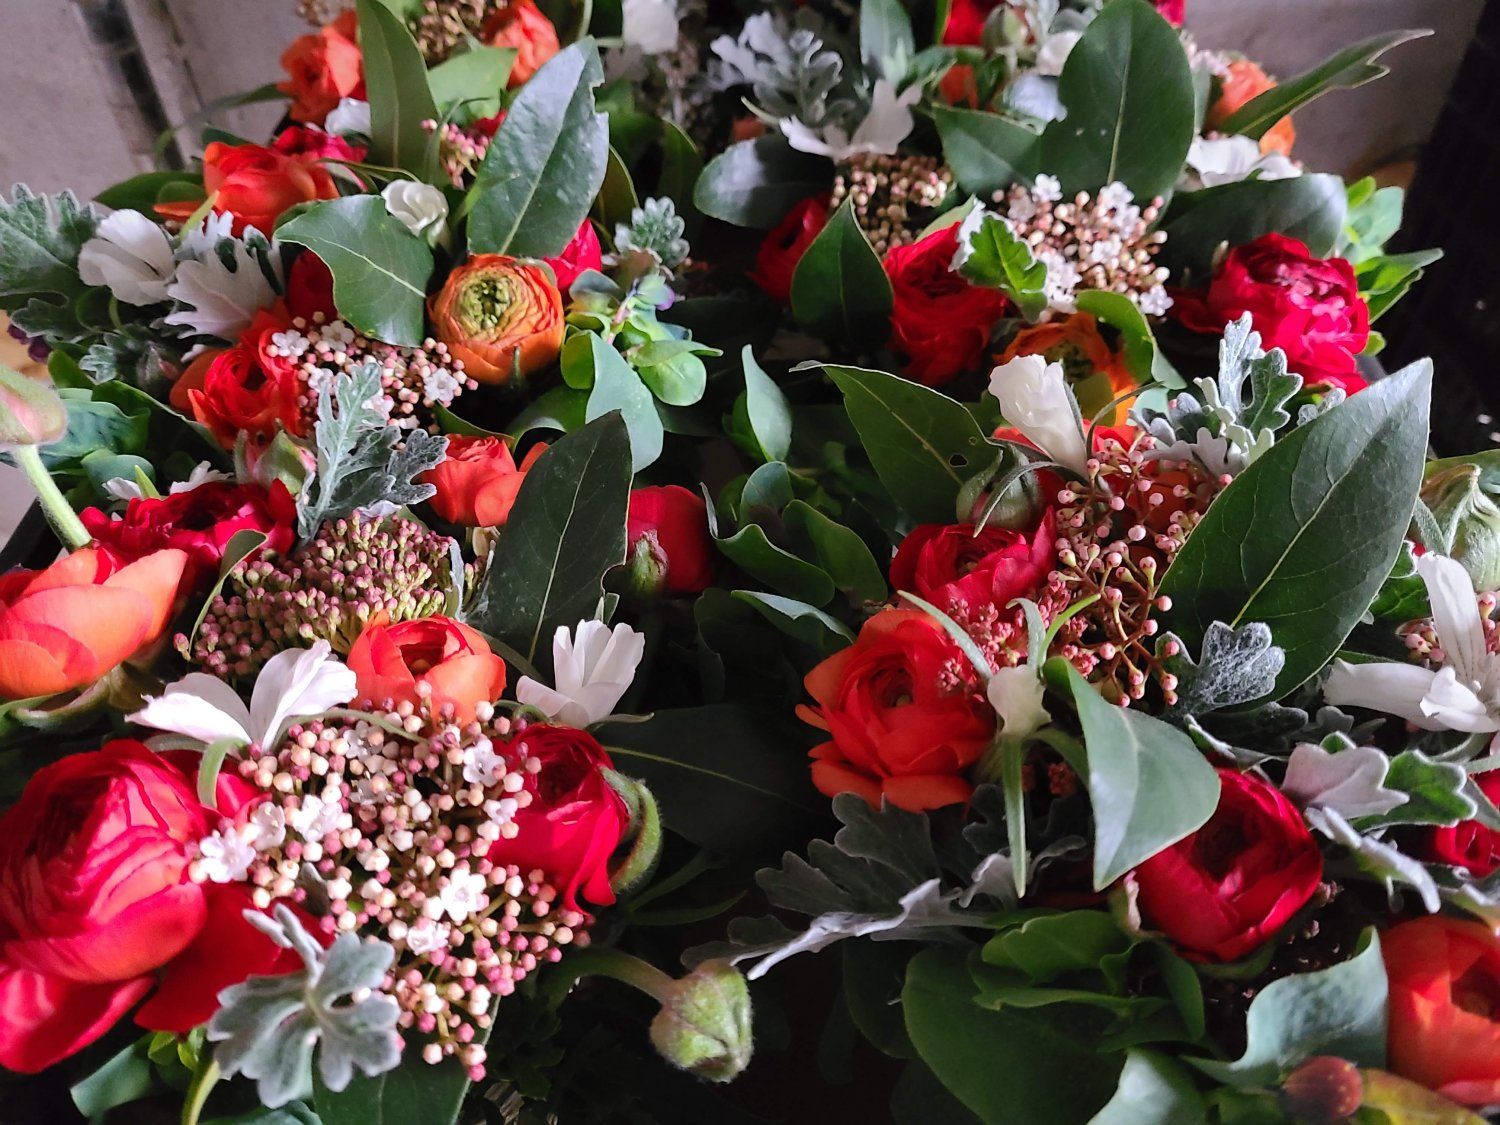 Get your Valentine's Day flowers ordered ahead